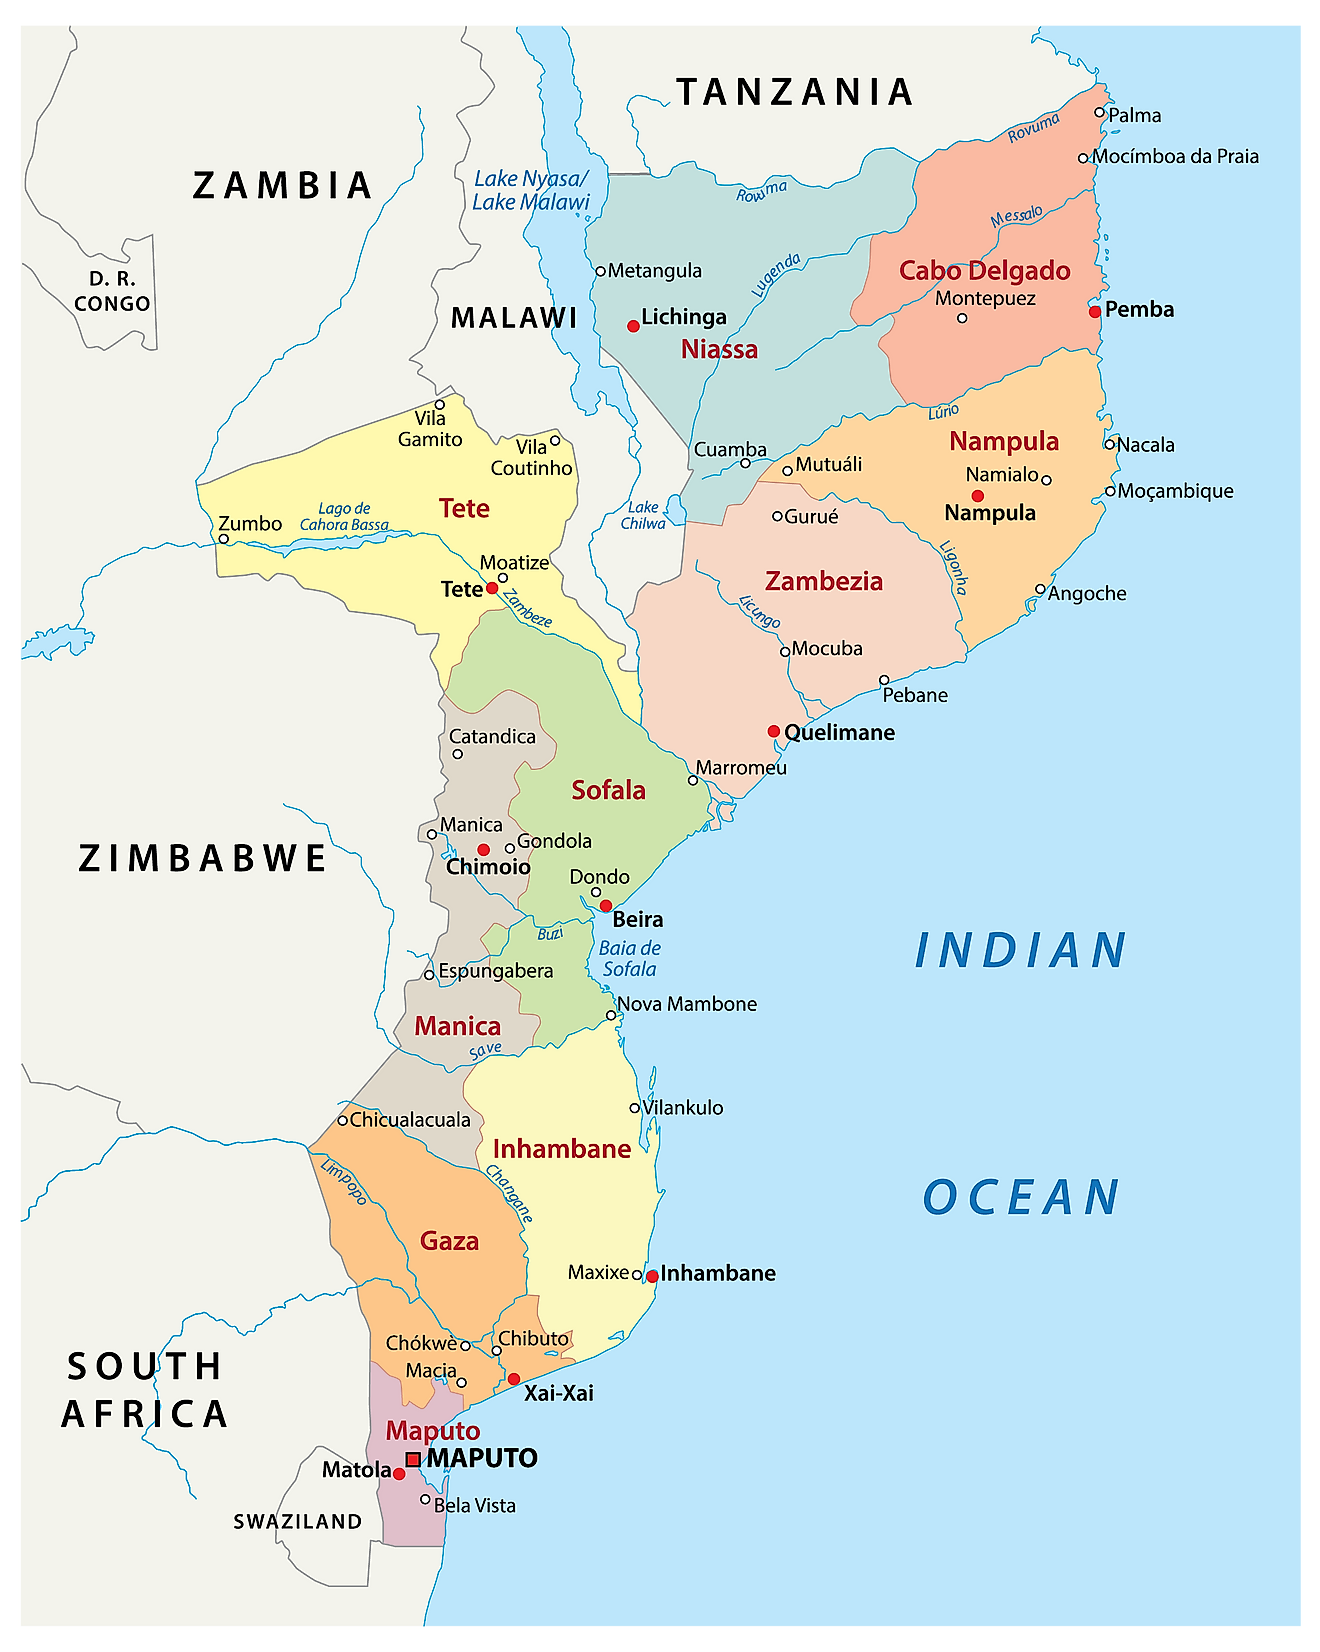 Political Map of Mozambique showing 10 provinces, their capital cities, and the national capital of Maputo.